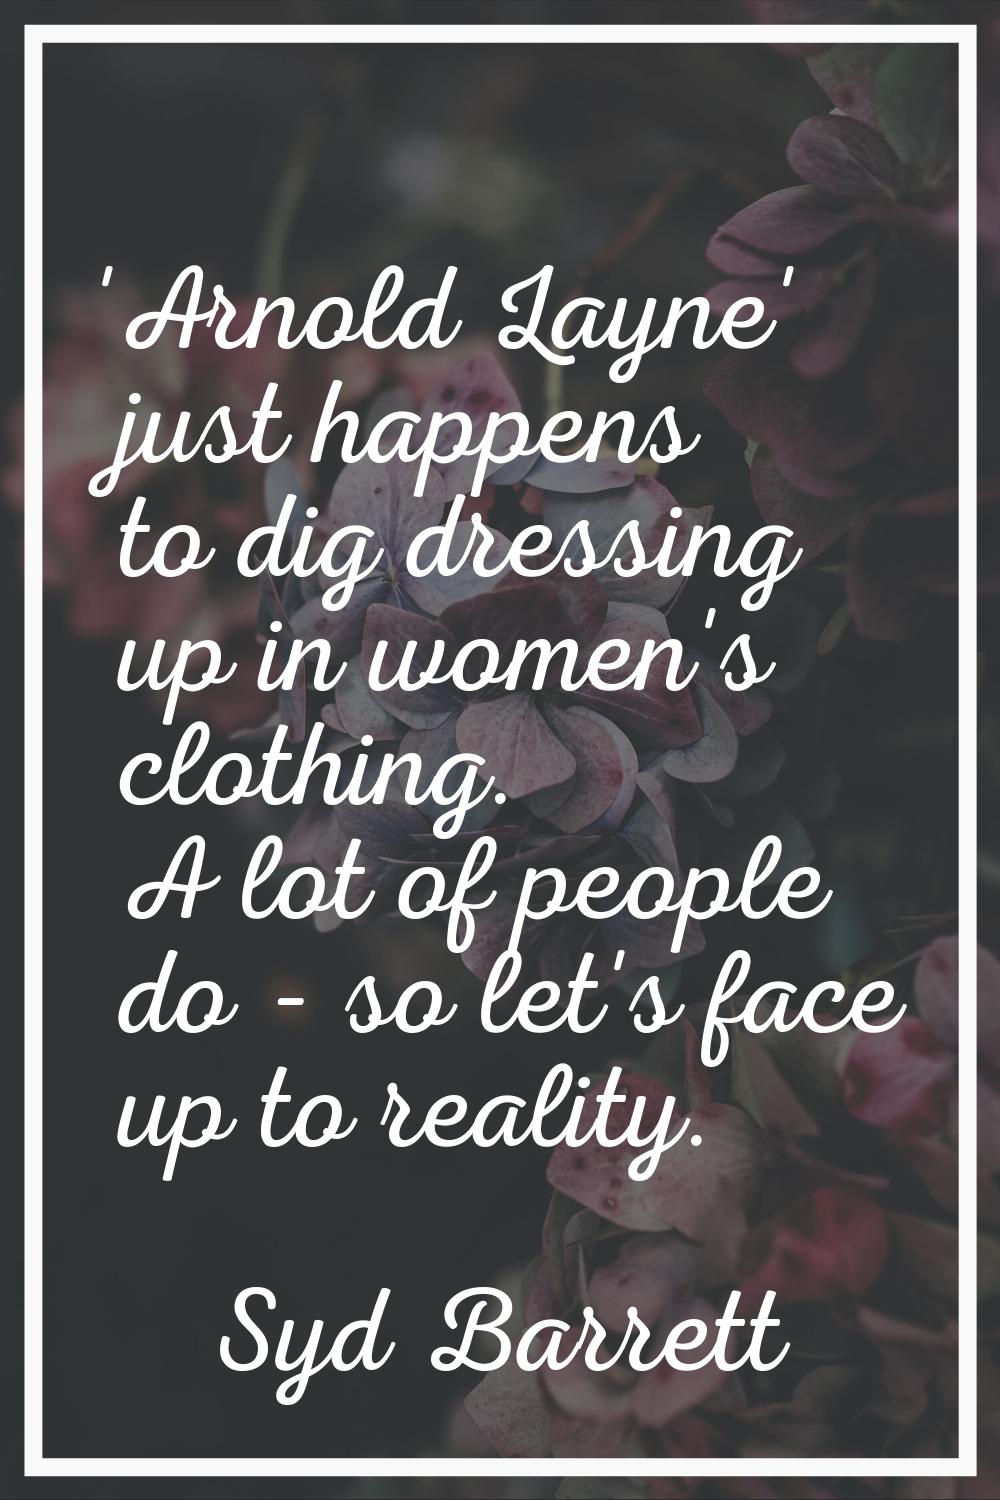 'Arnold Layne' just happens to dig dressing up in women's clothing. A lot of people do - so let's f